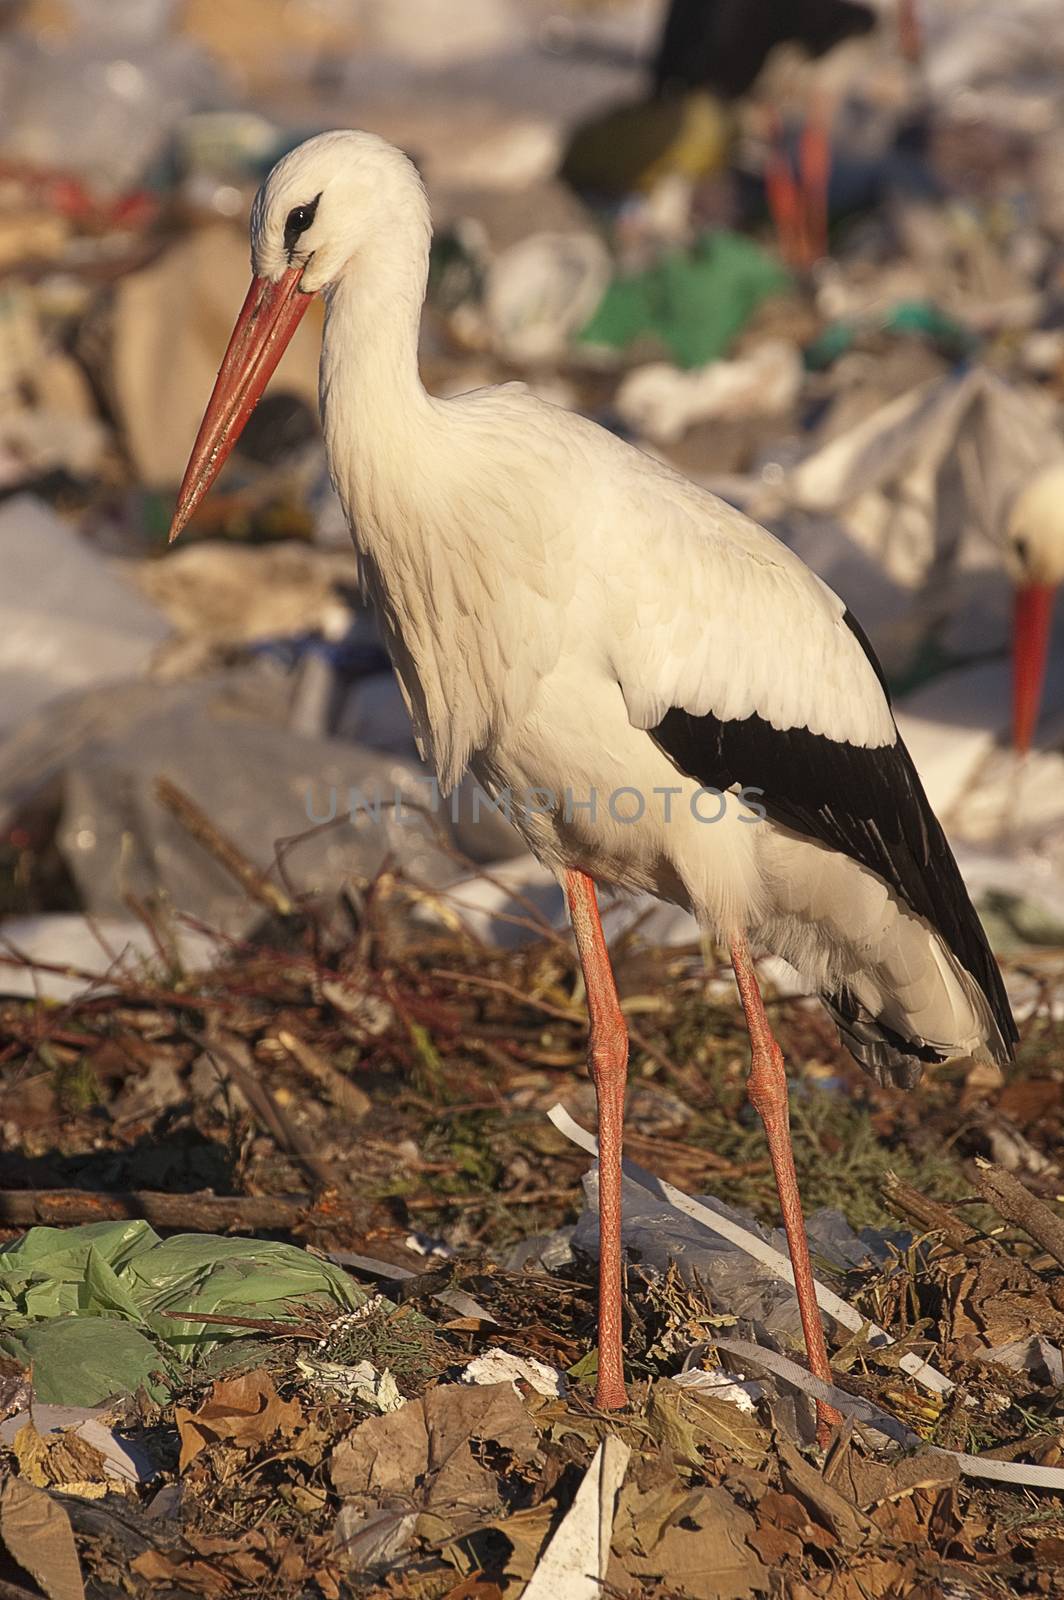 white stork looking for food in the garbage, Ciconia ciconia by jalonsohu@gmail.com